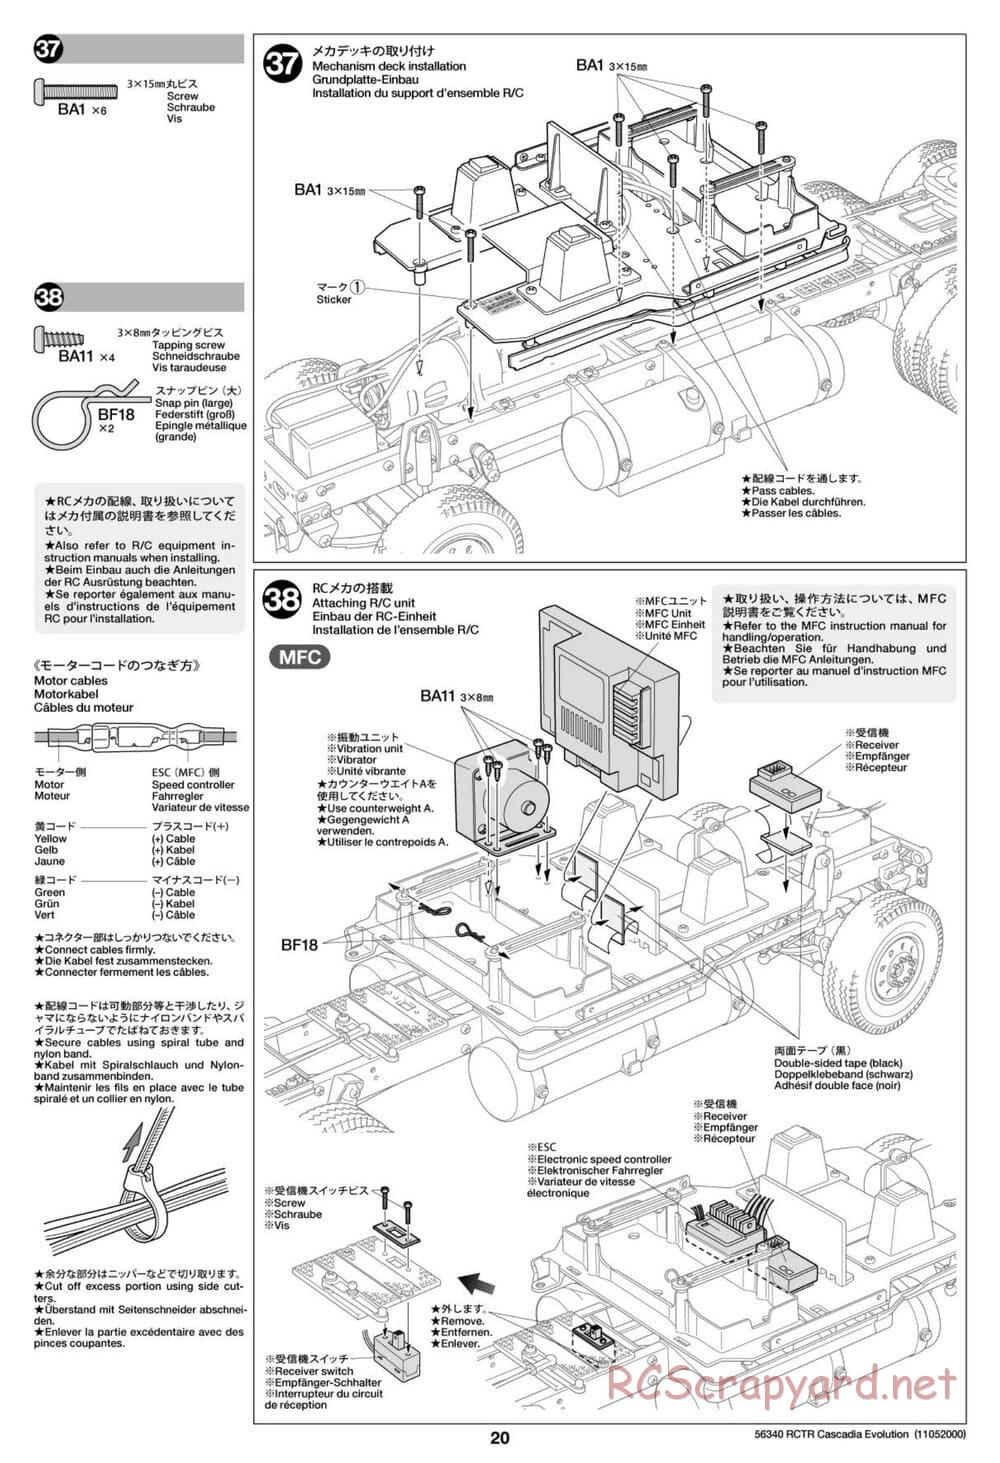 Tamiya - Freightliner Cascadia Evolution Tractor Truck Chassis - Manual - Page 20